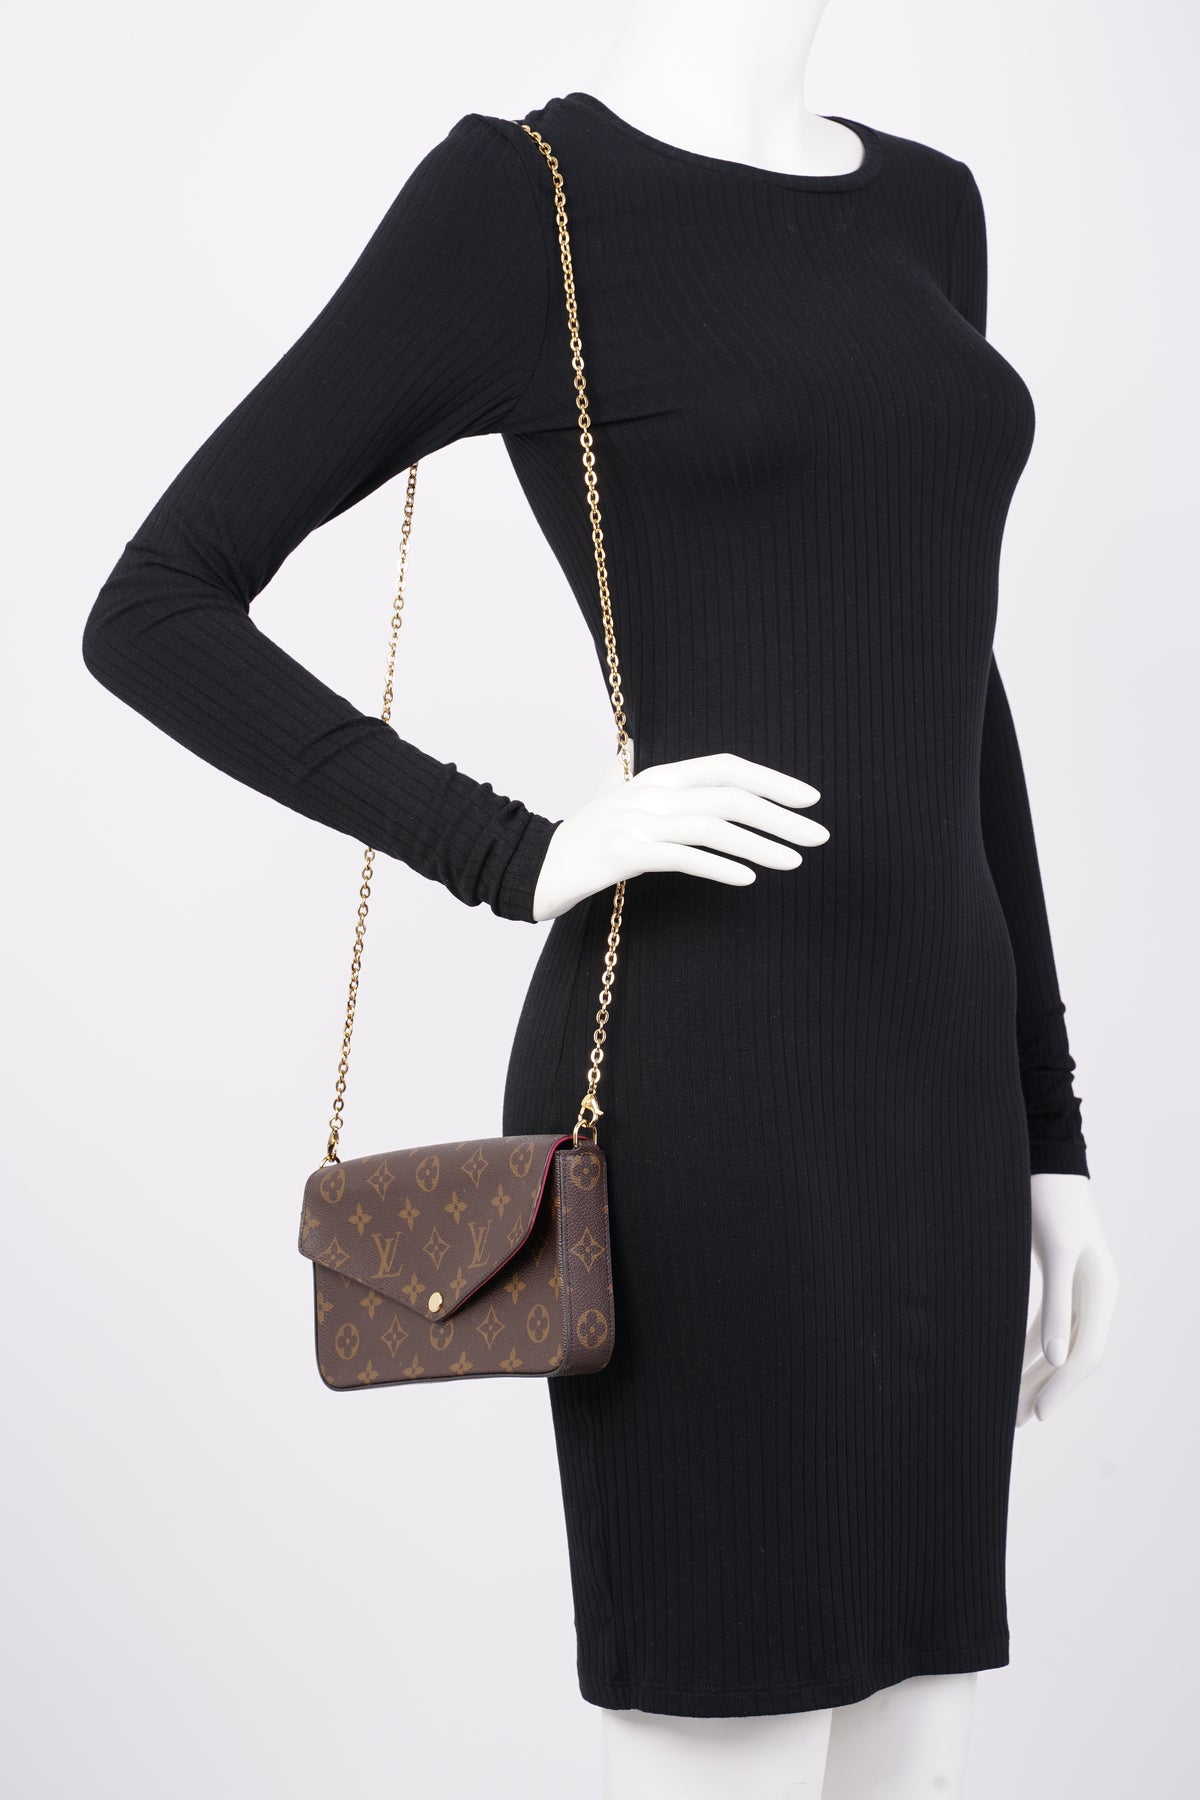 The Pochette Felicie Club!  Louis vuitton outfit, Branded outfits